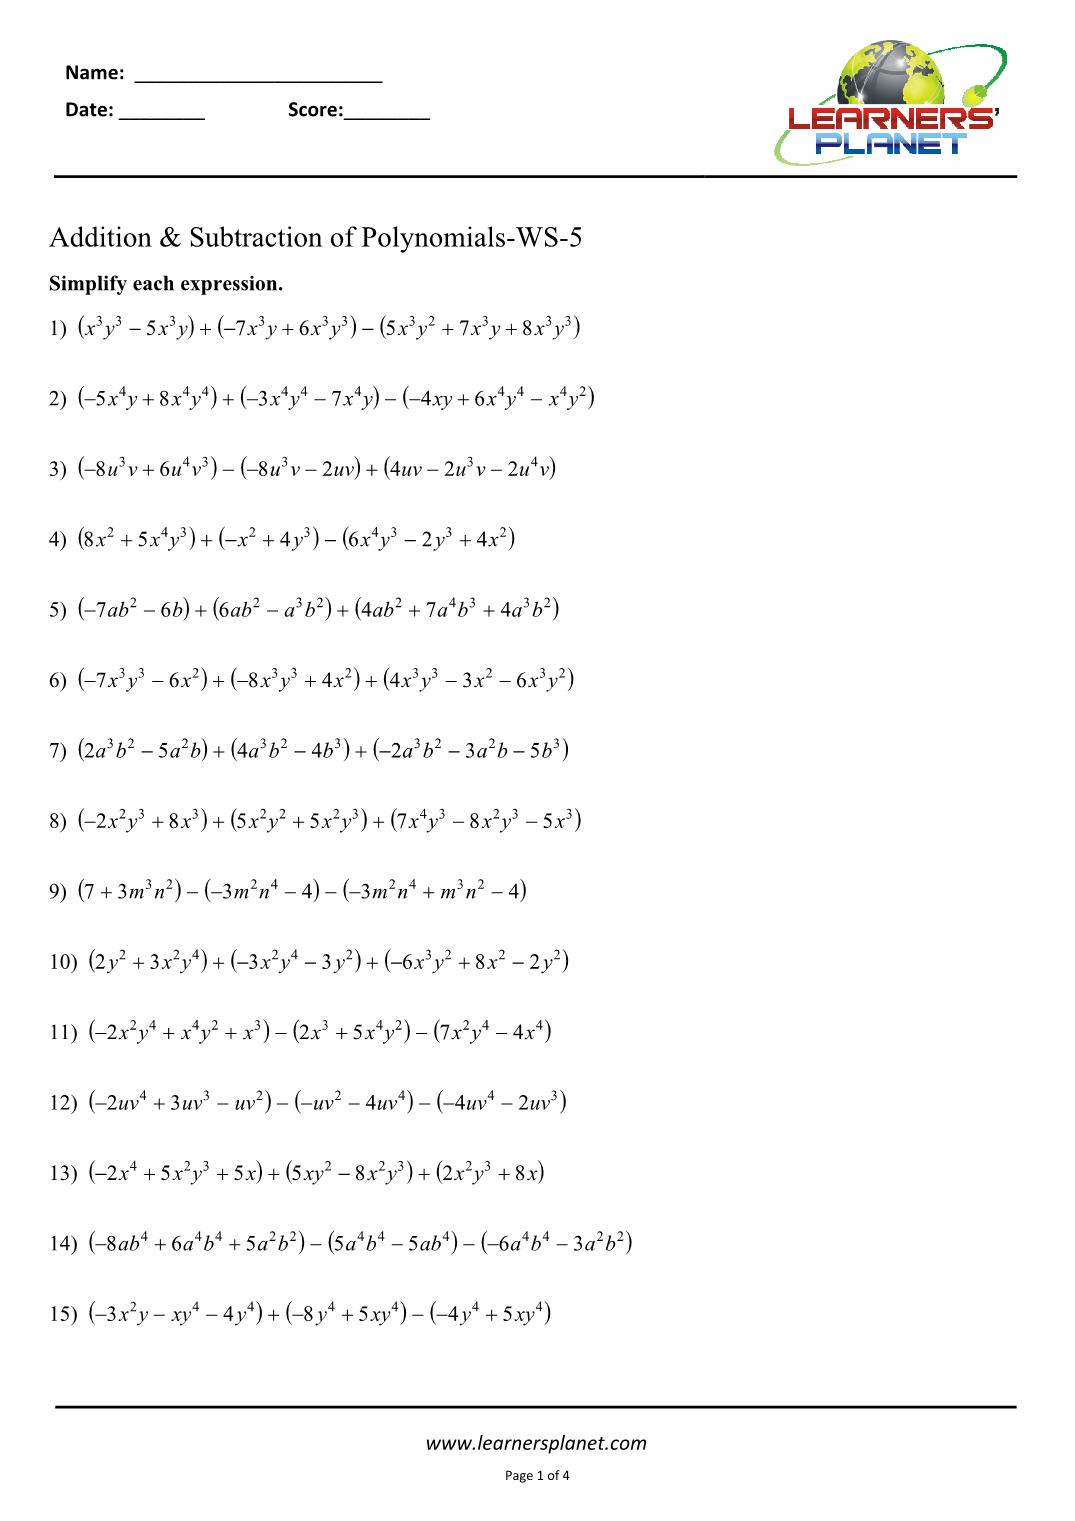 Adding and subtracting polynomials worksheets with answers With Regard To Adding And Subtracting Polynomials Worksheet